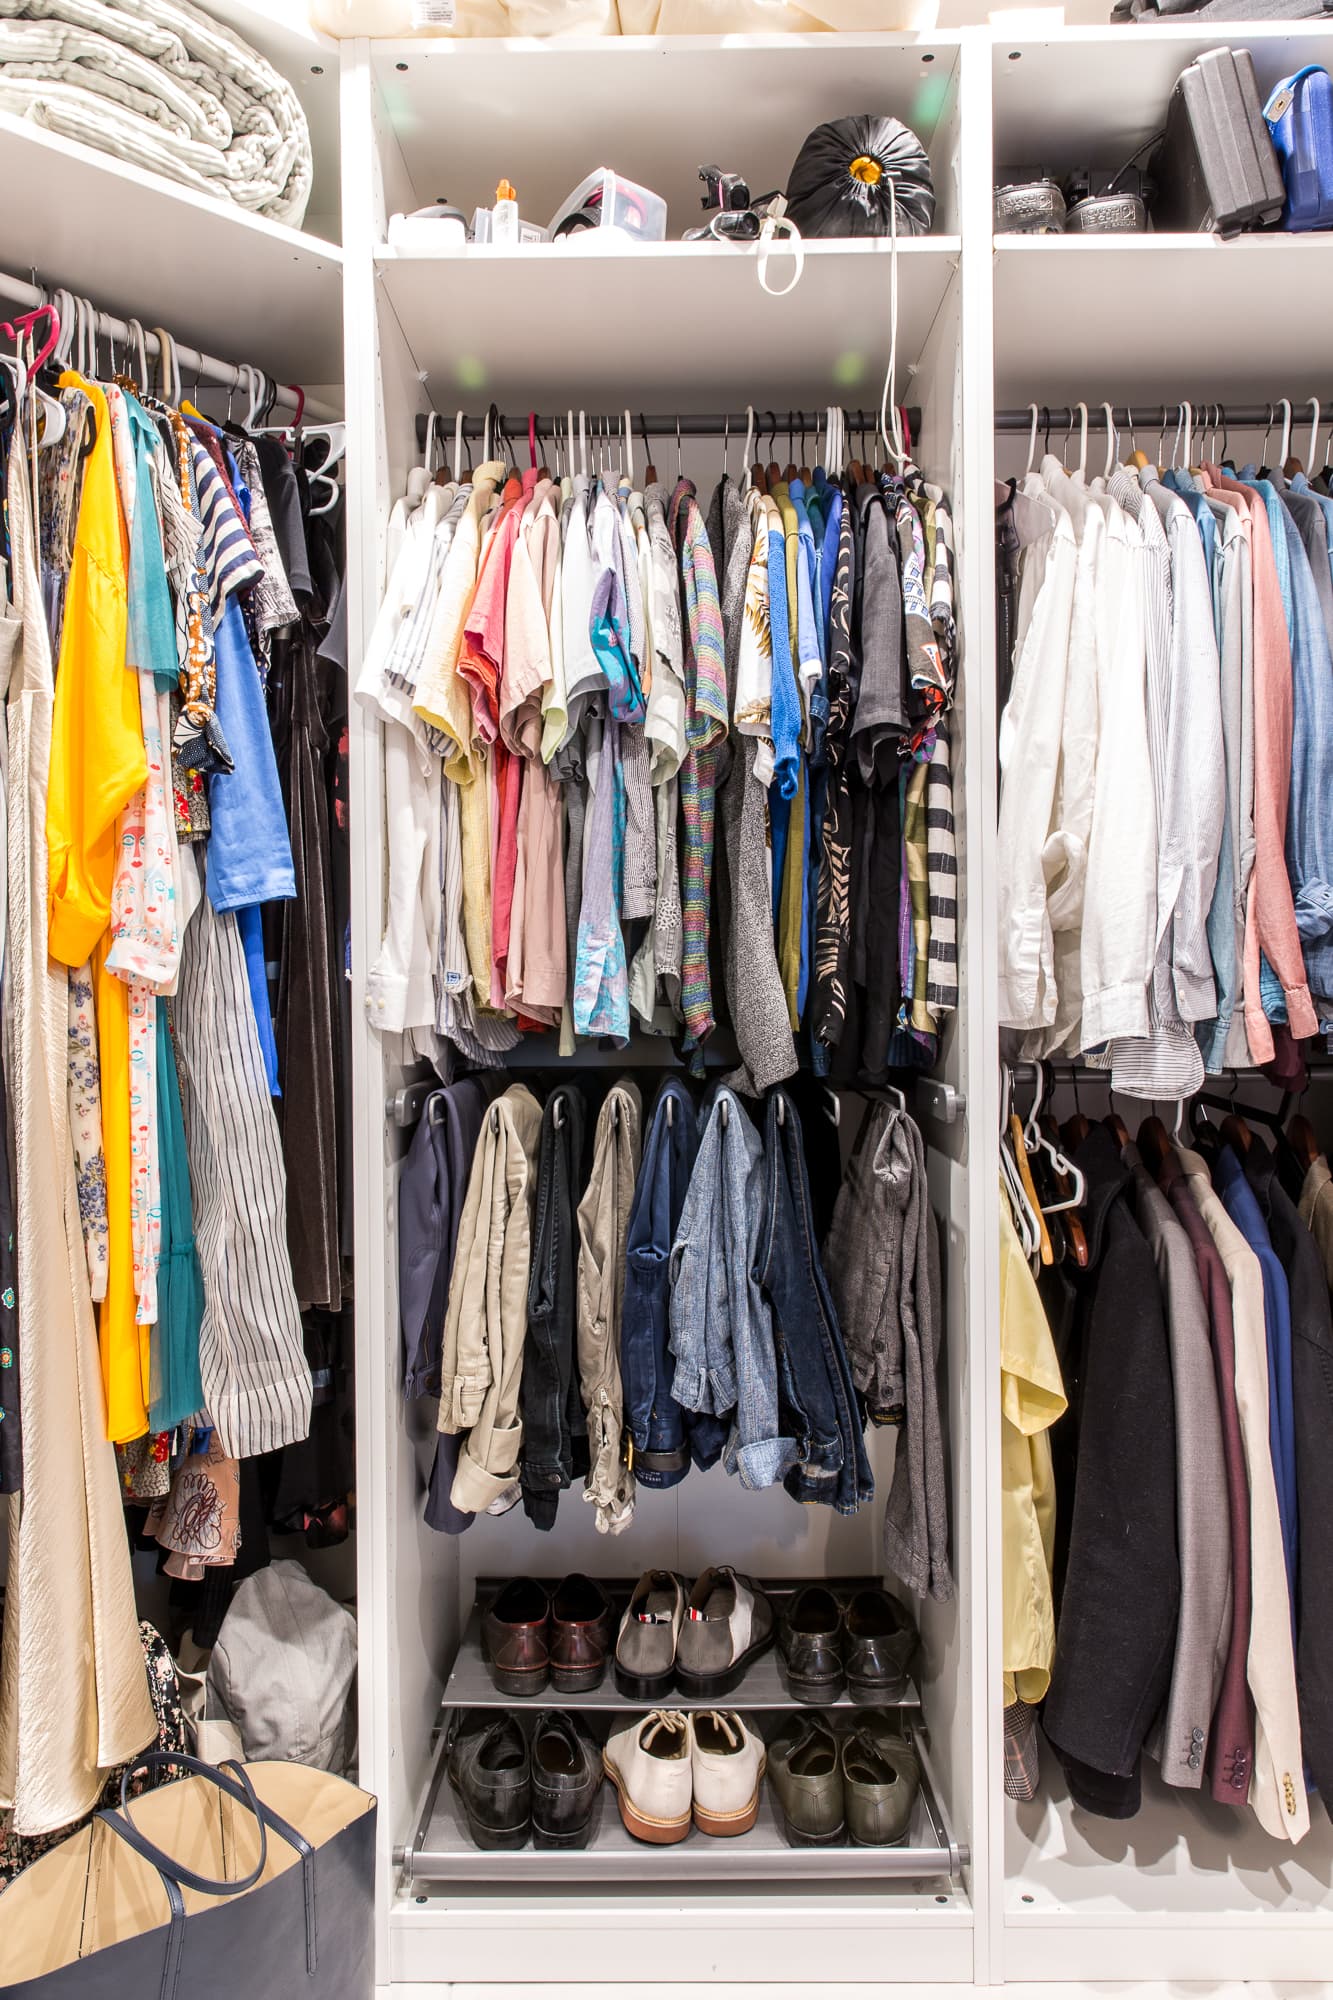 How to Sell Your Clothes: 6 Things I've Learned About Trading In My Closet  Cleanout - Buffalo Exchange